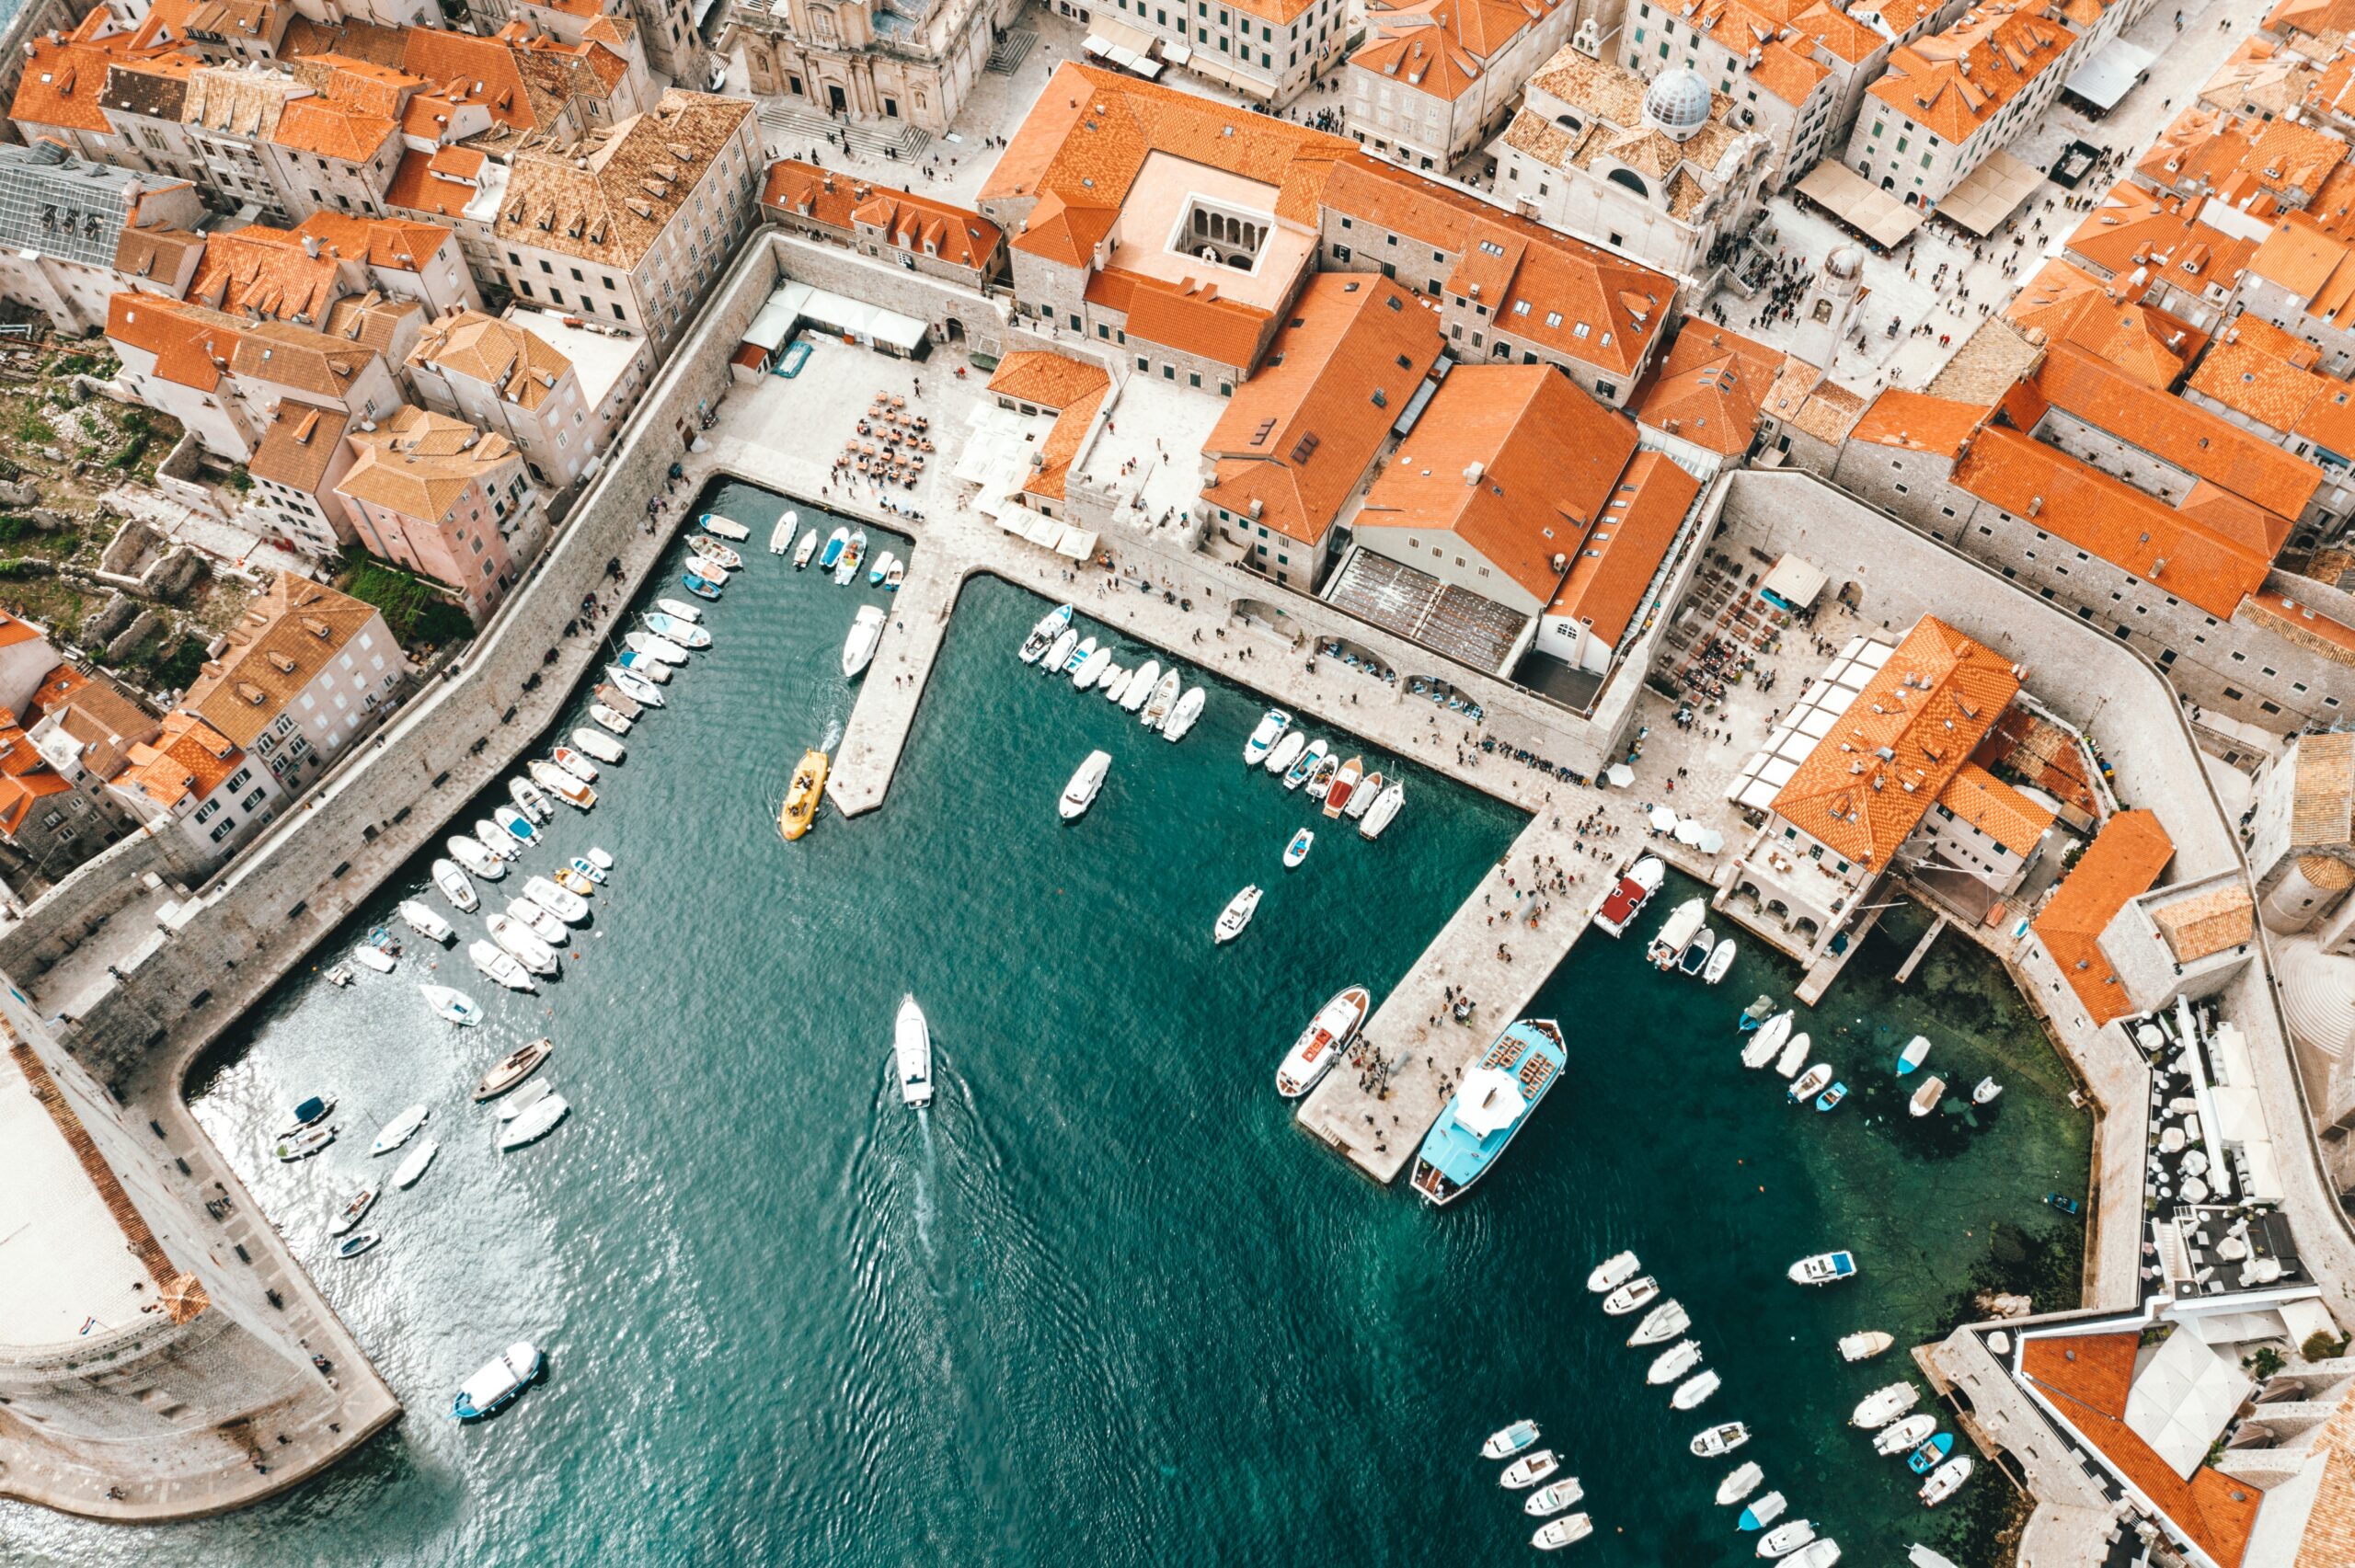 An aerial view of the old town of Dubrovnik, Croatia.